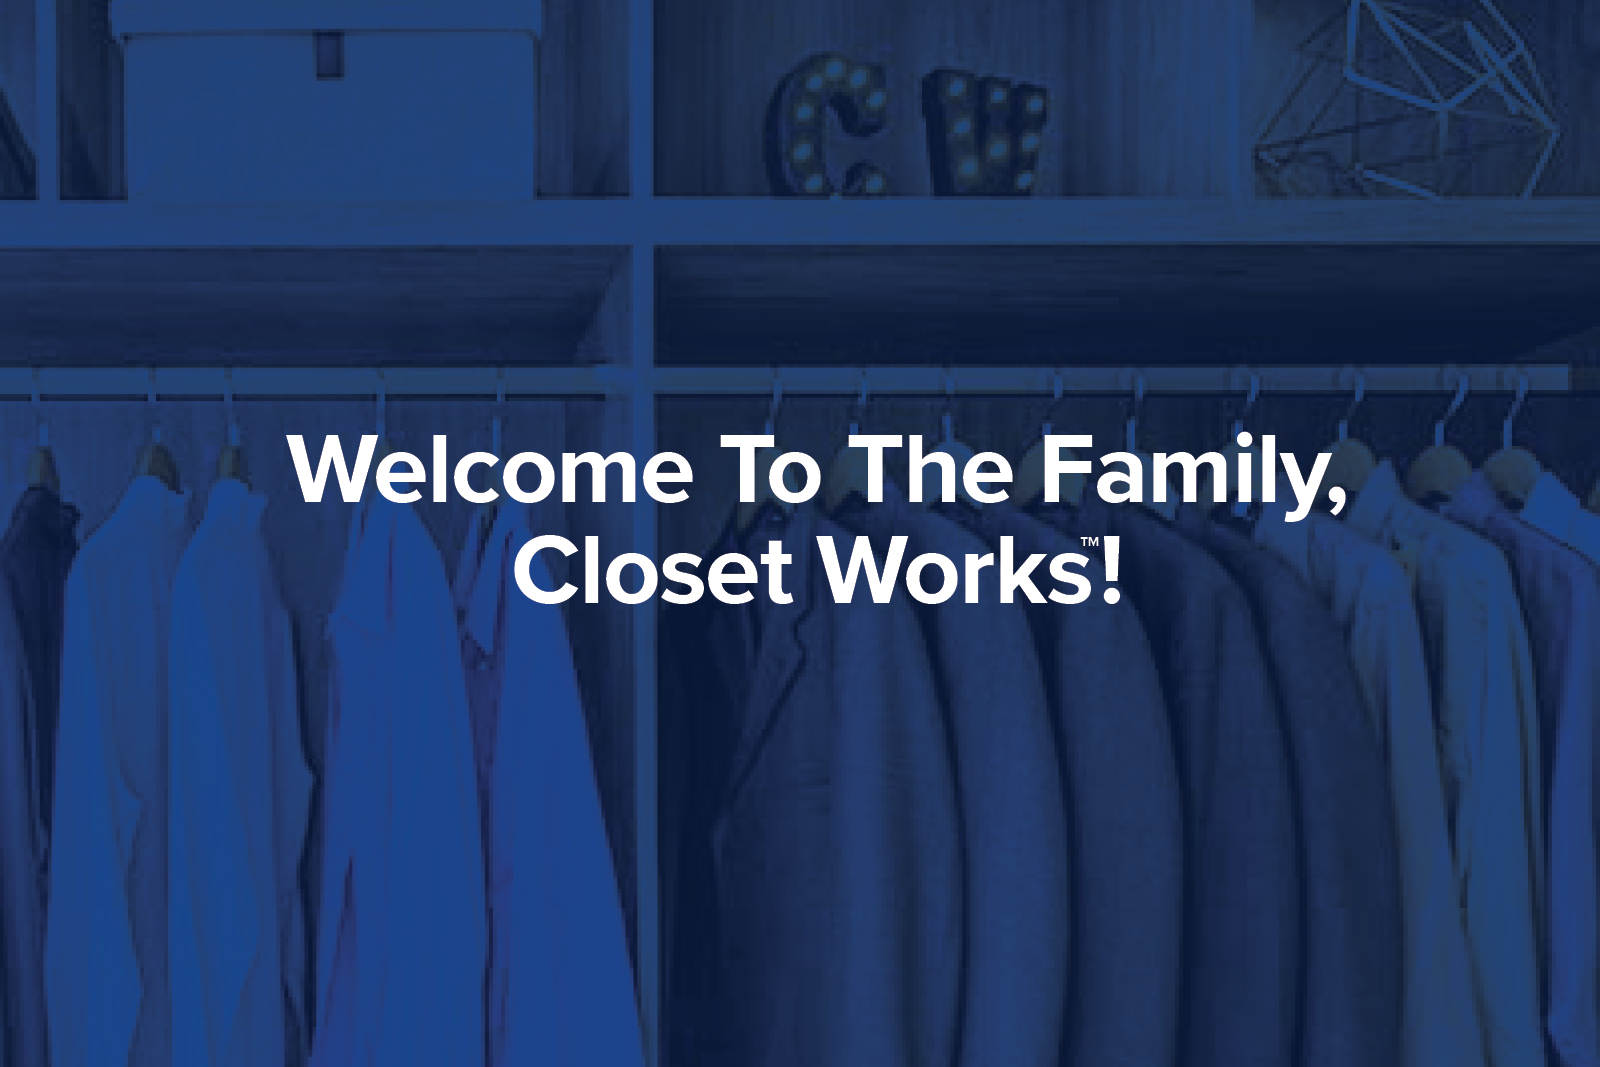 The Container Store acquires storage company Closet Works for